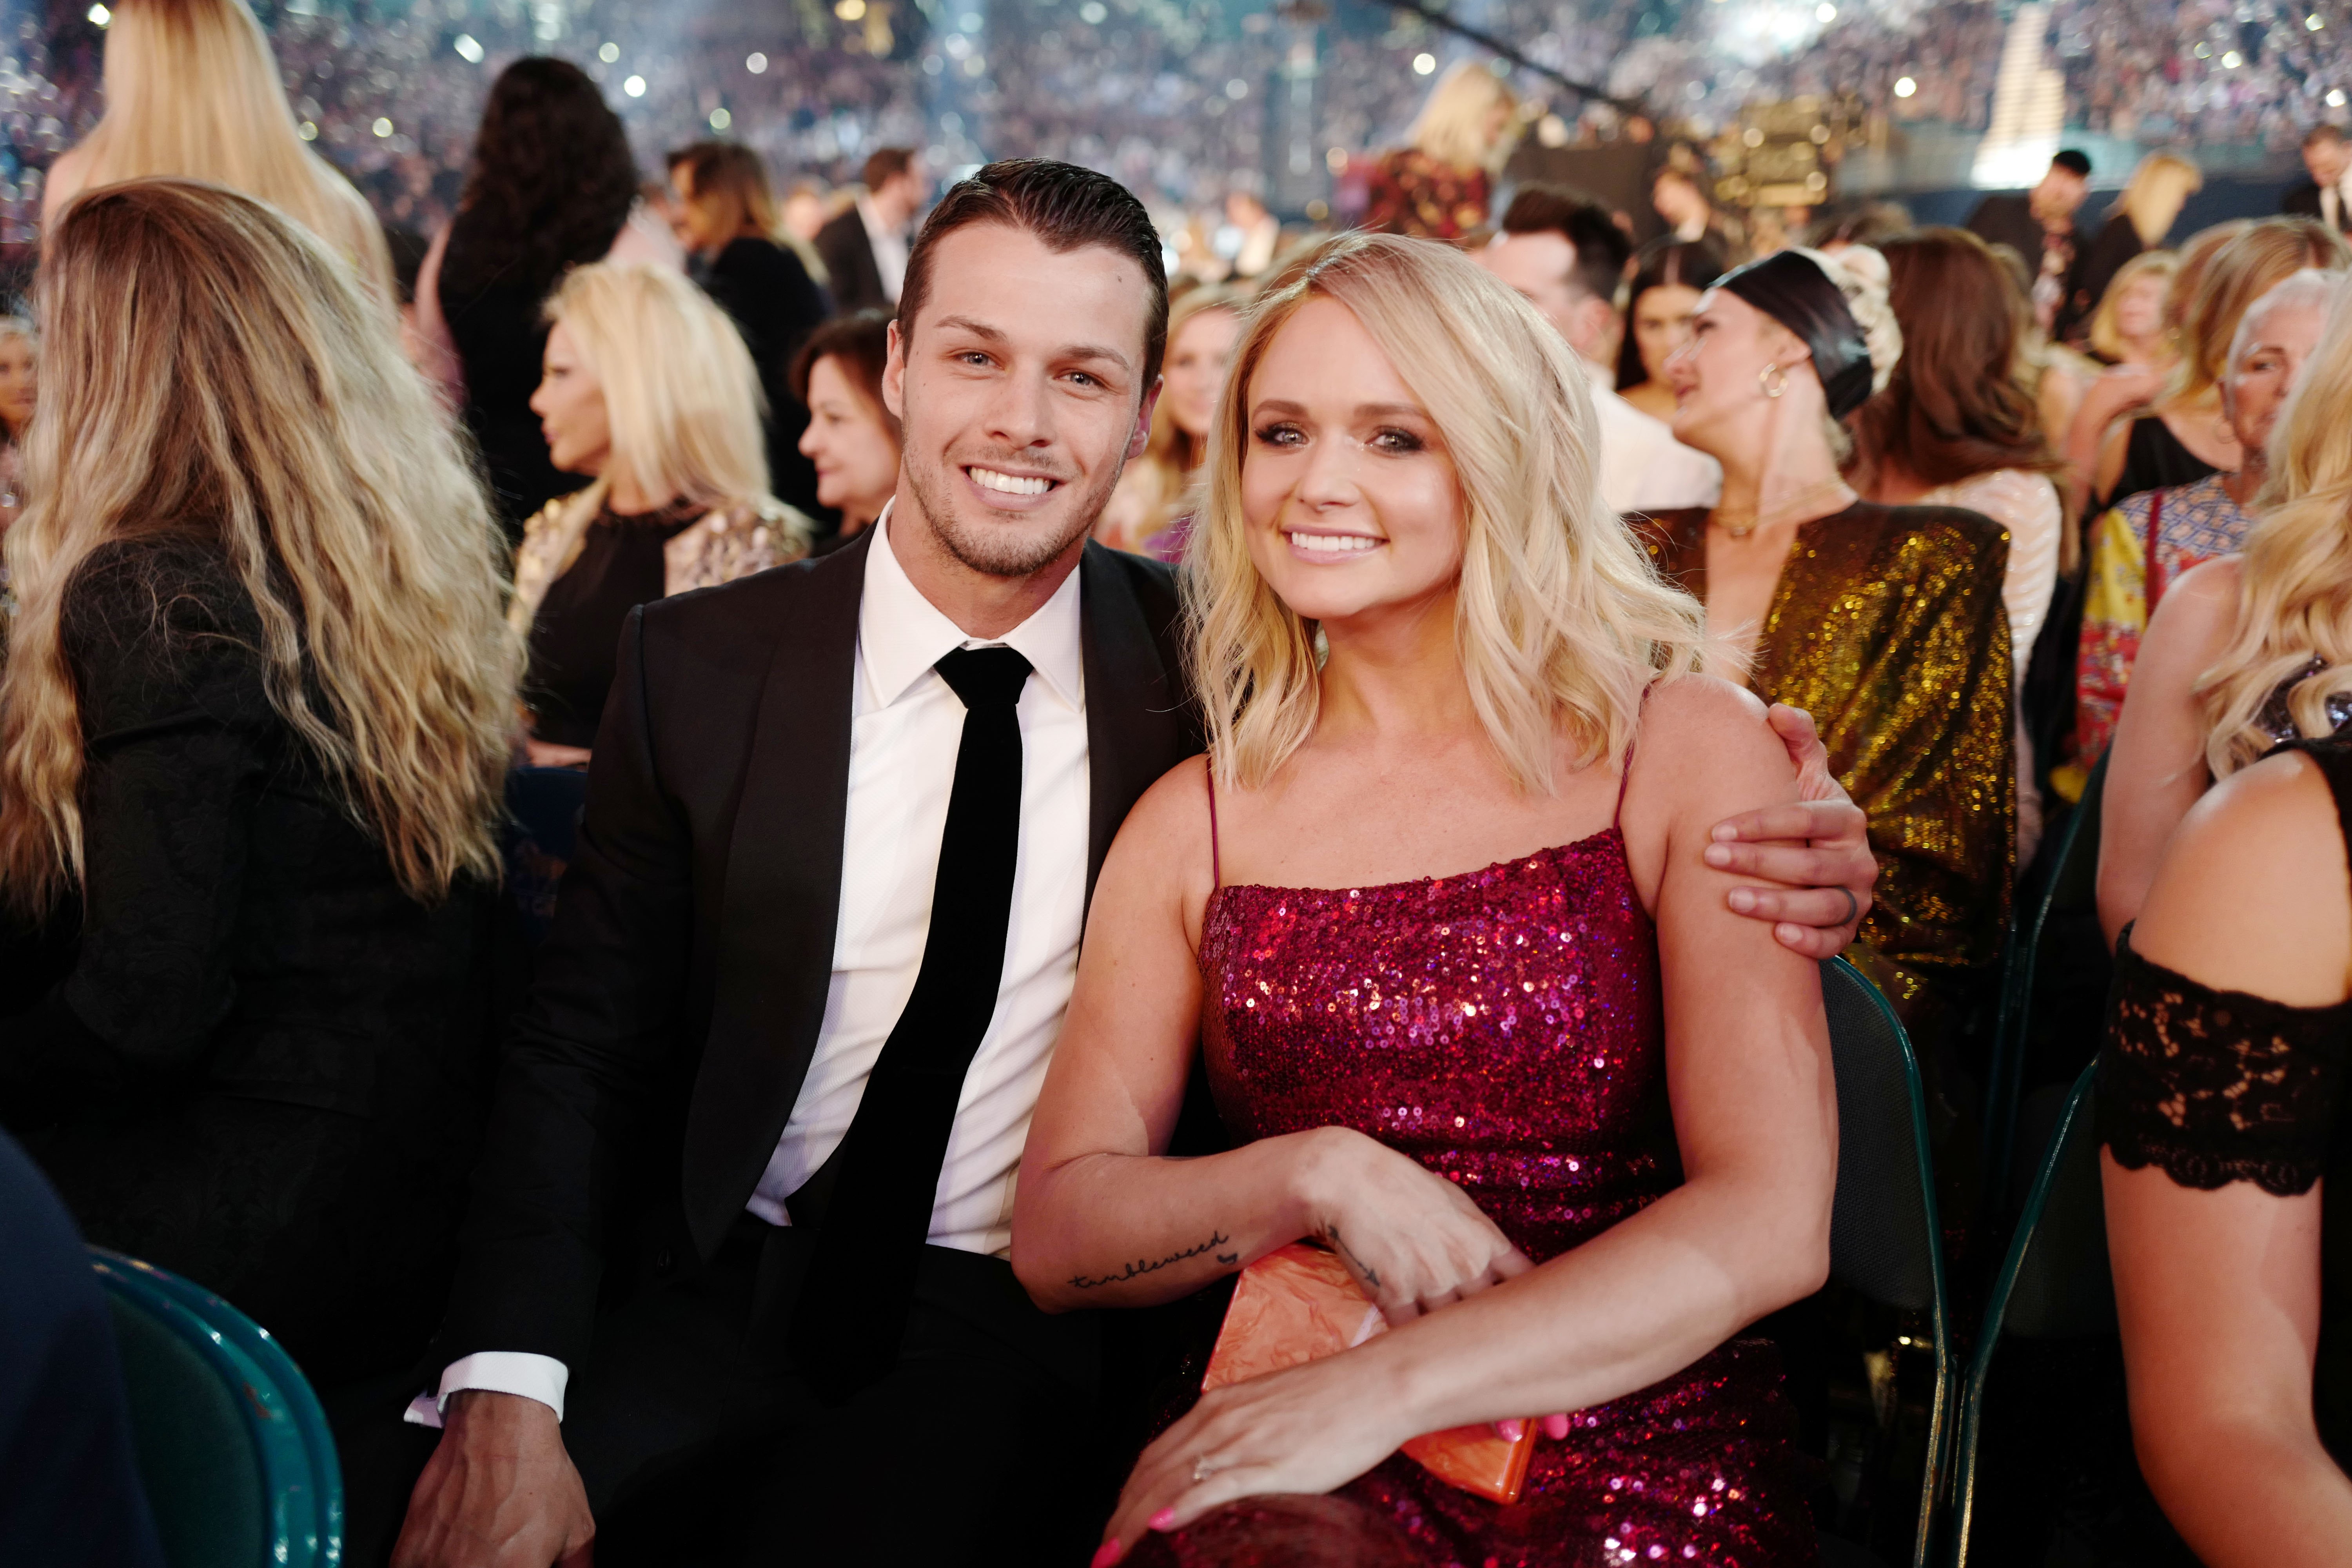 Brendan McLoughlin and Miranda Lambert attend the 54th Academy Of Country Music Awards at MGM Grand Garden Arena on April 07, 2019, in Las Vegas, Nevada. | Source: Getty Images.